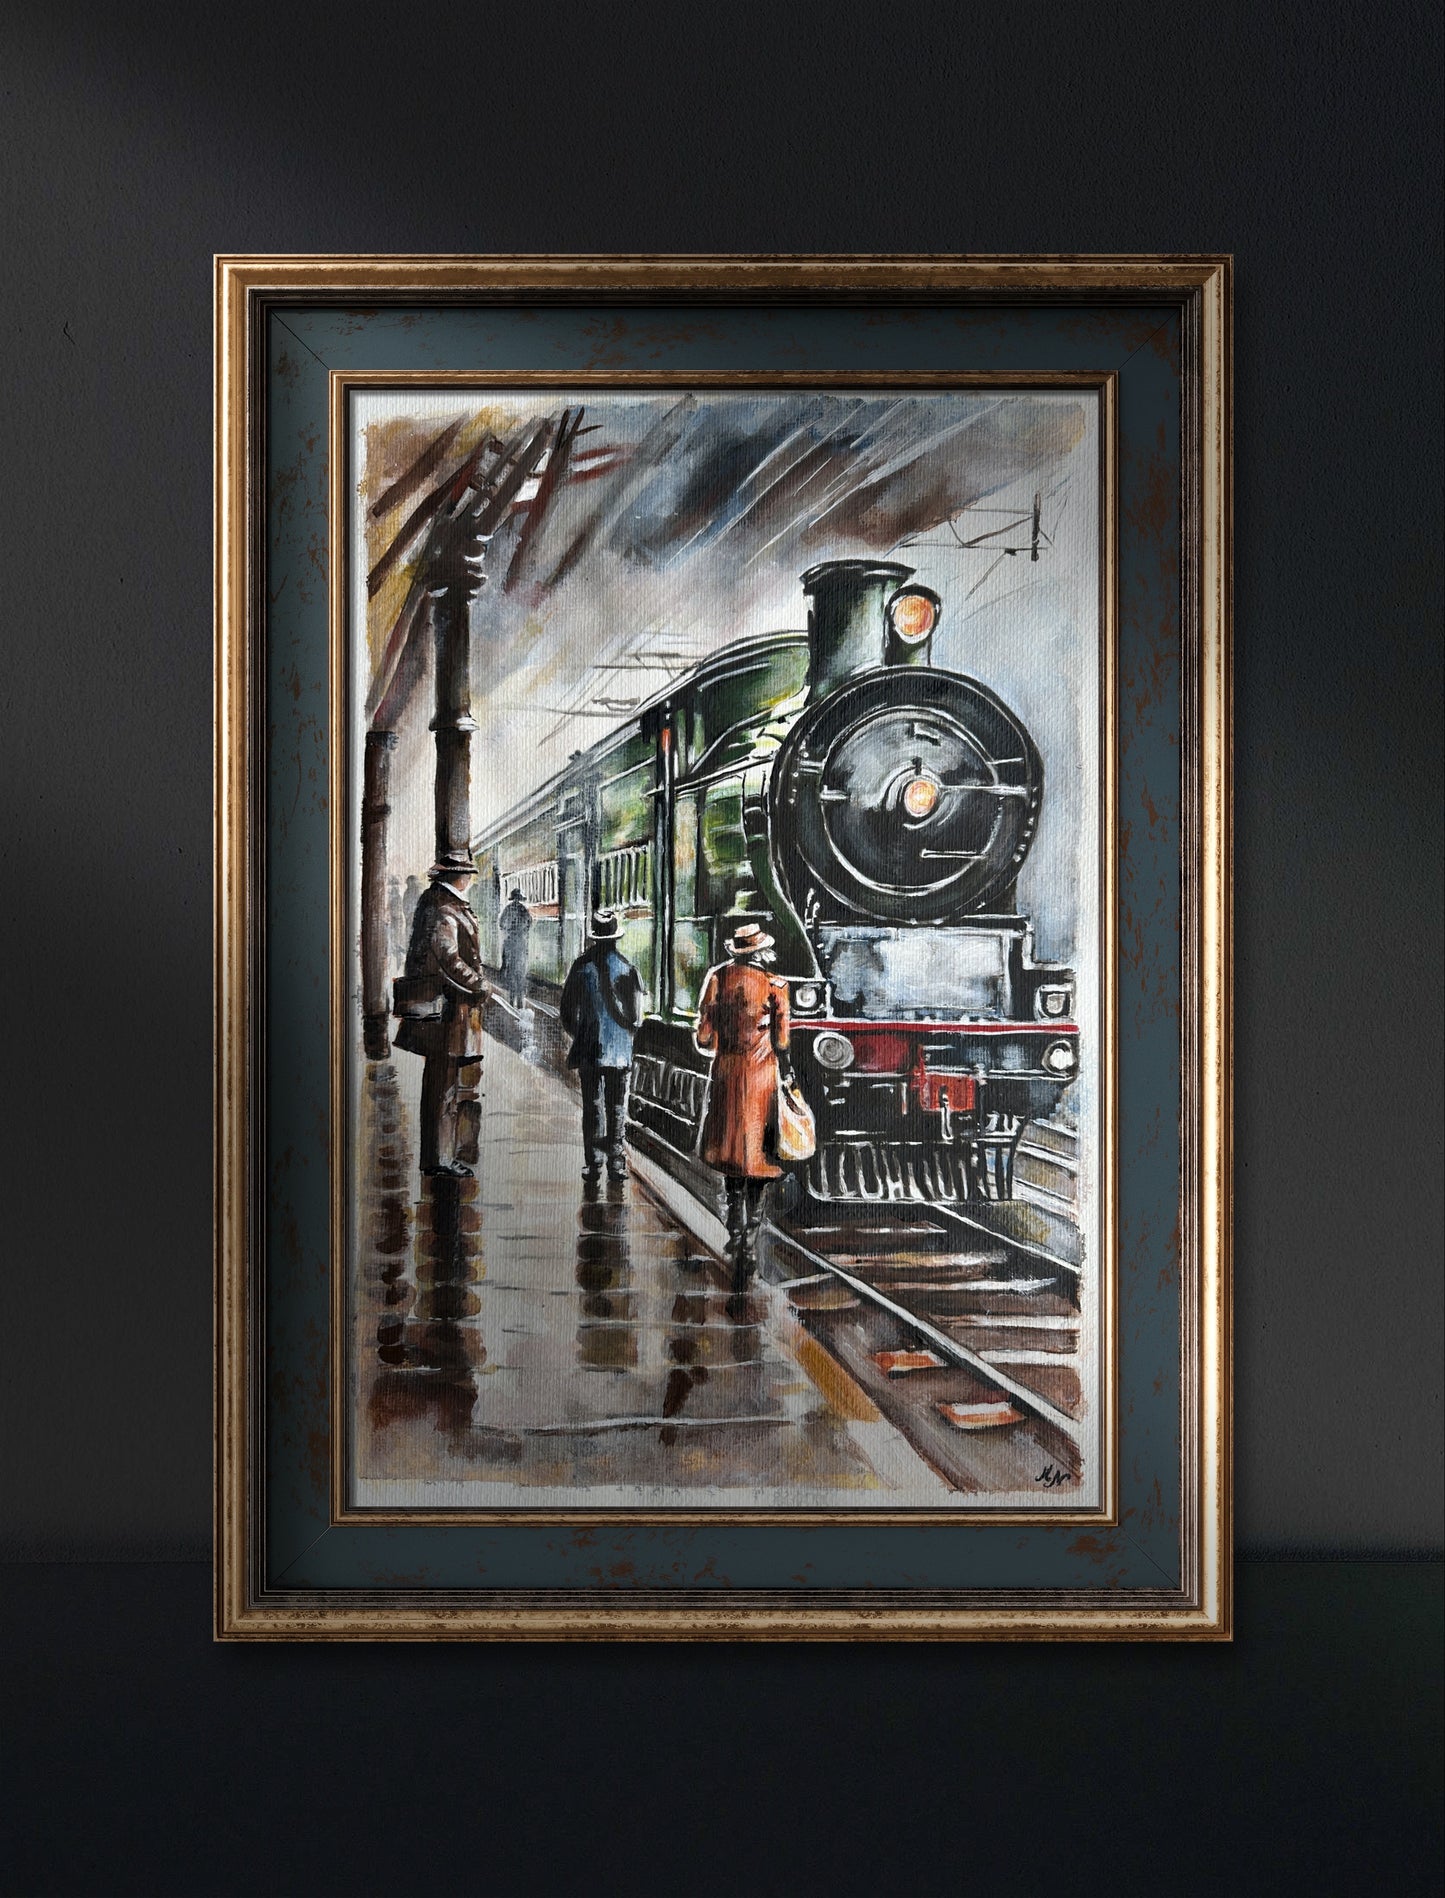 In "Age of Steam," artistically rendered scenes of human interaction merge seamlessly with the timeless allure of locomotives.